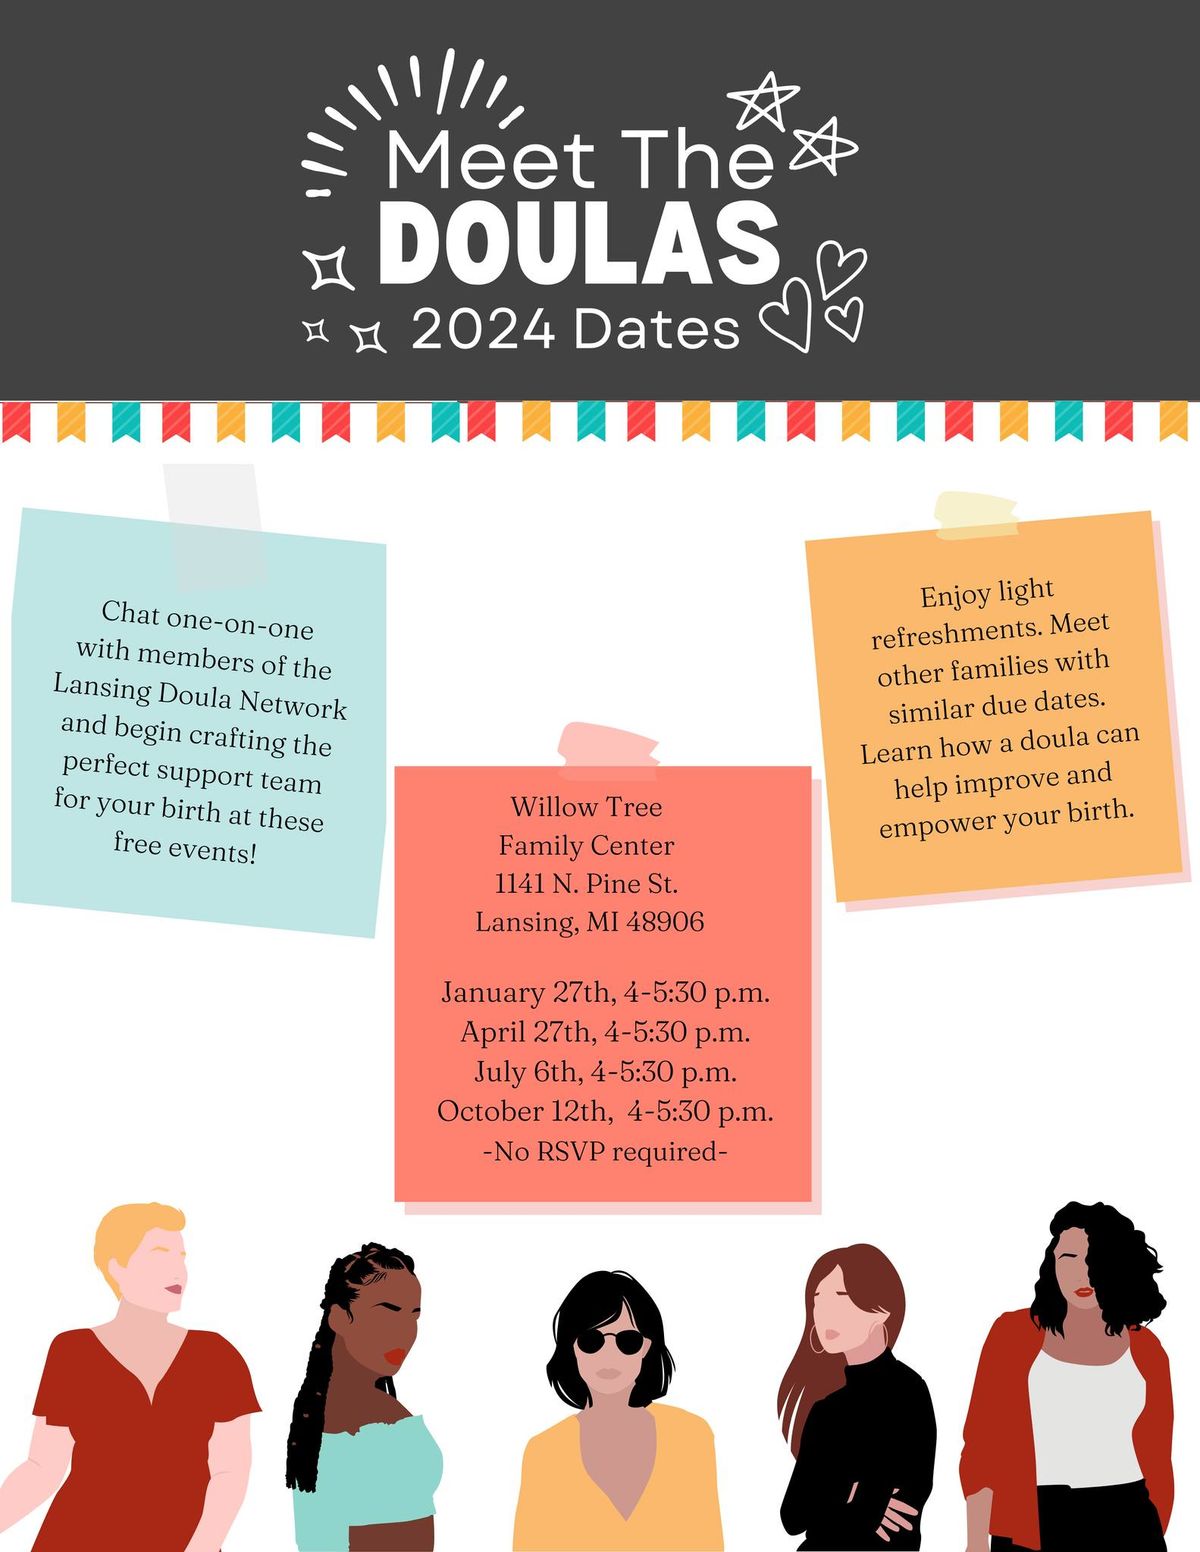 Meet The Doulas Events!